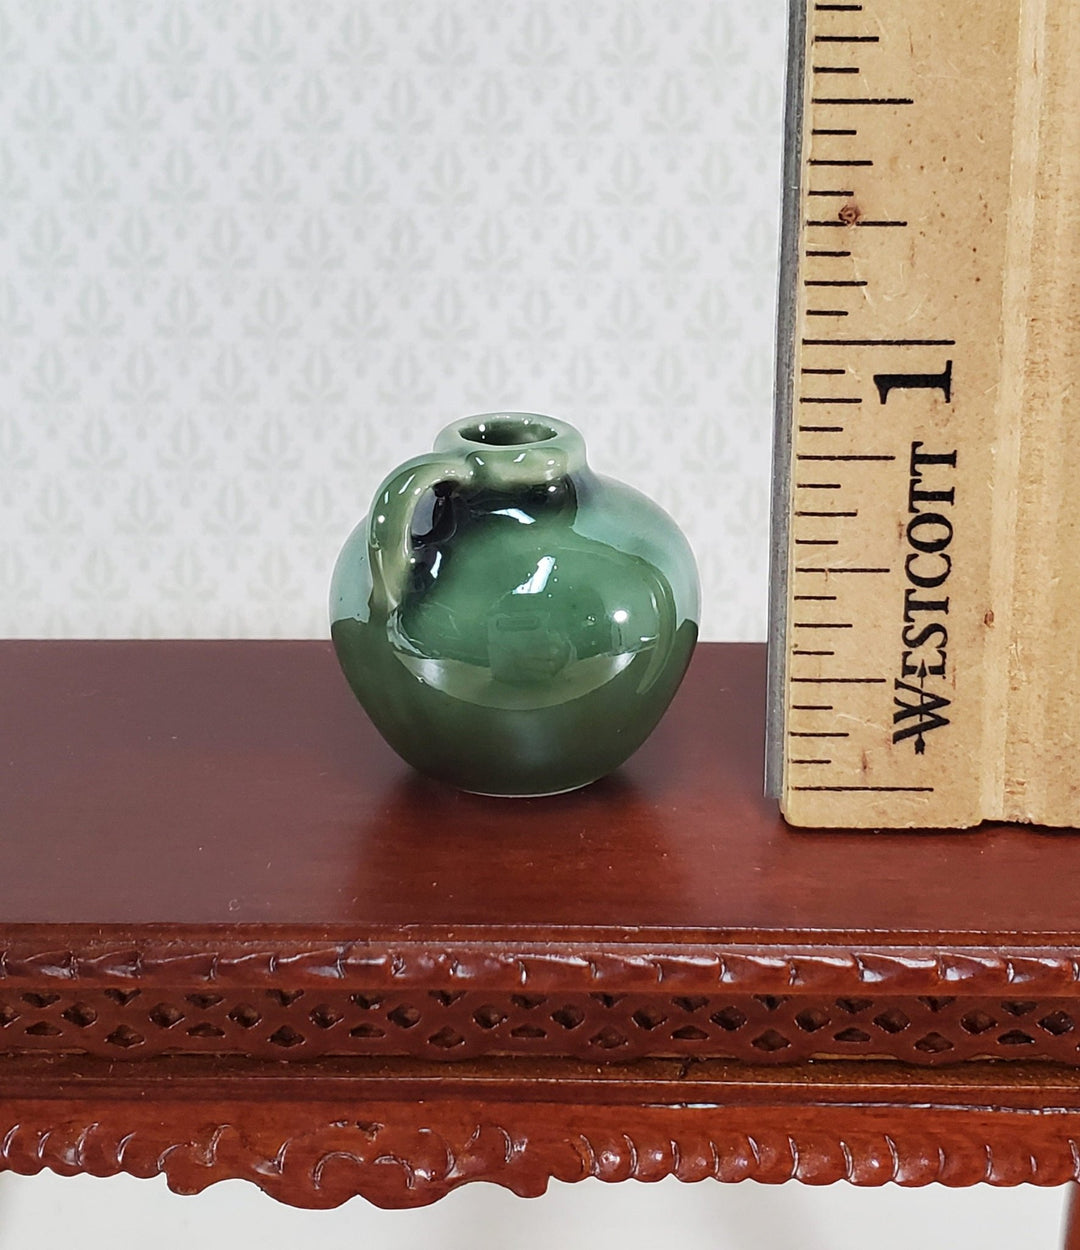 Dollhouse Jug with Handle Green Ceramic for Flowers or Decoration 1:12 Scale Miniature - Miniature Crush